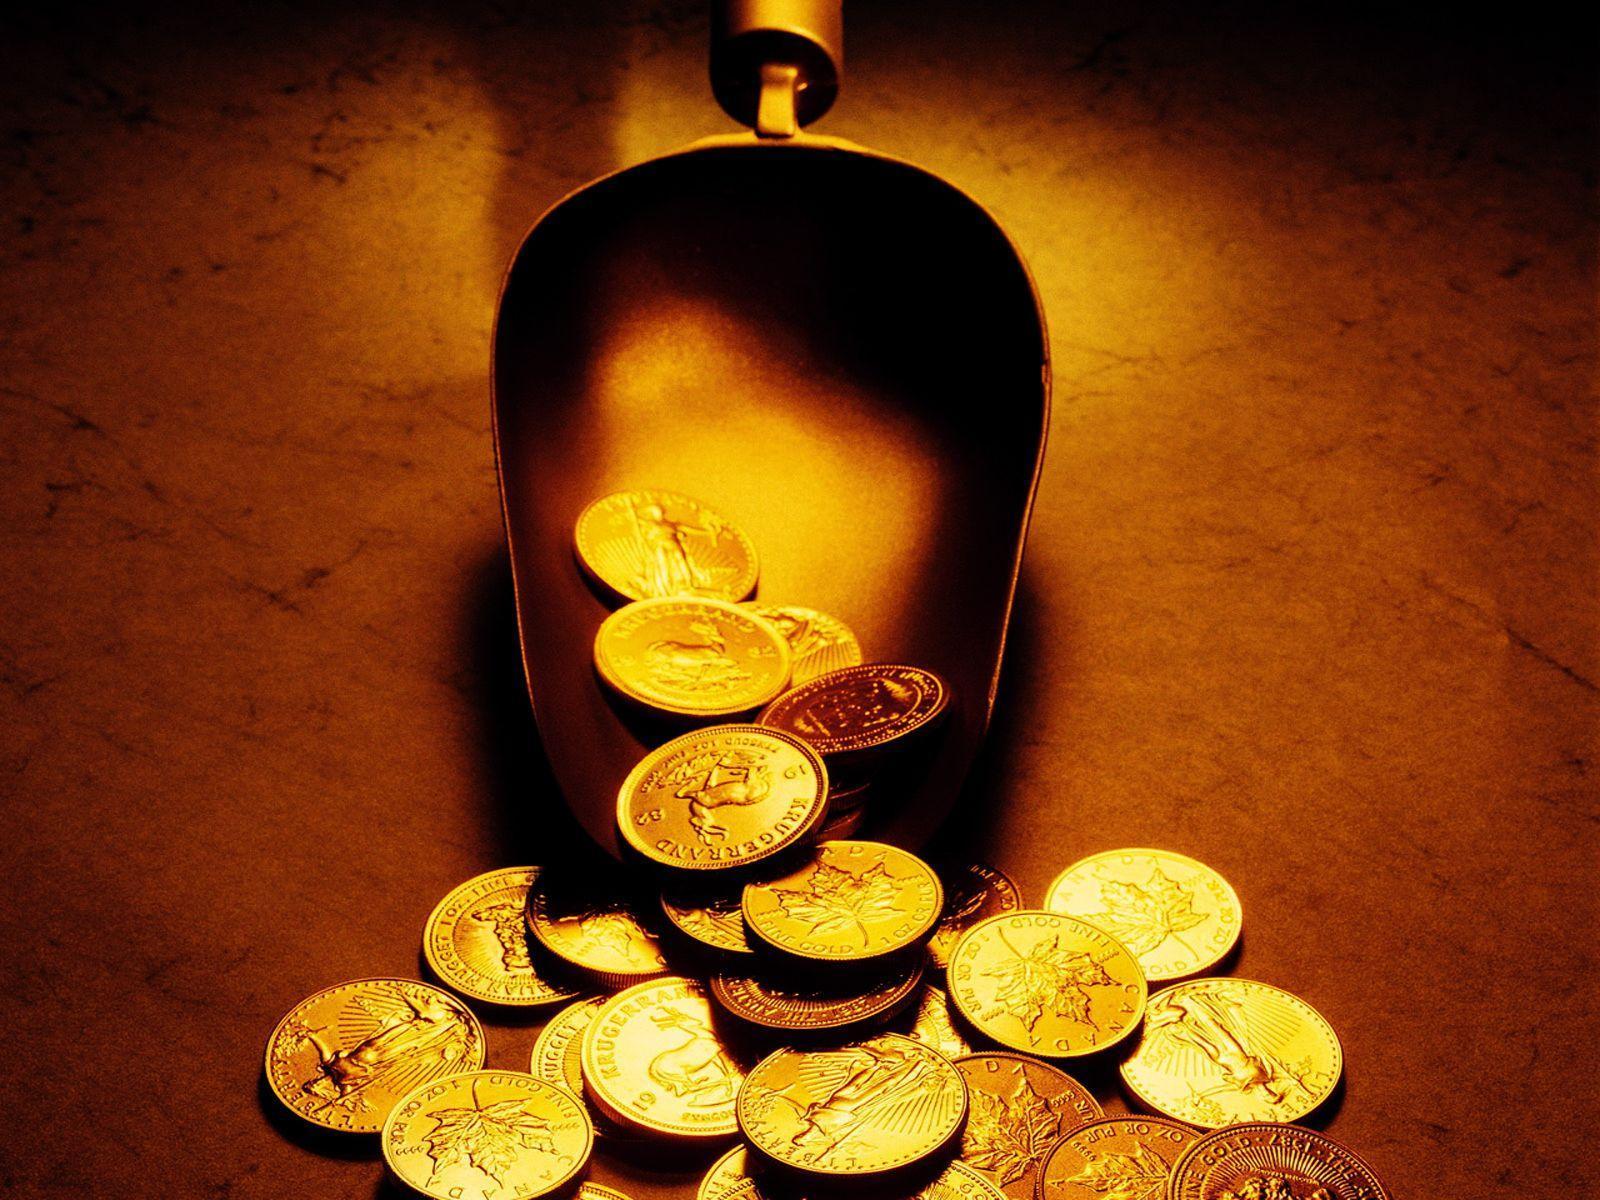 GOLD BARS AND COINS HD WALLPAPERS STOCK PHOTOS For Windows 7